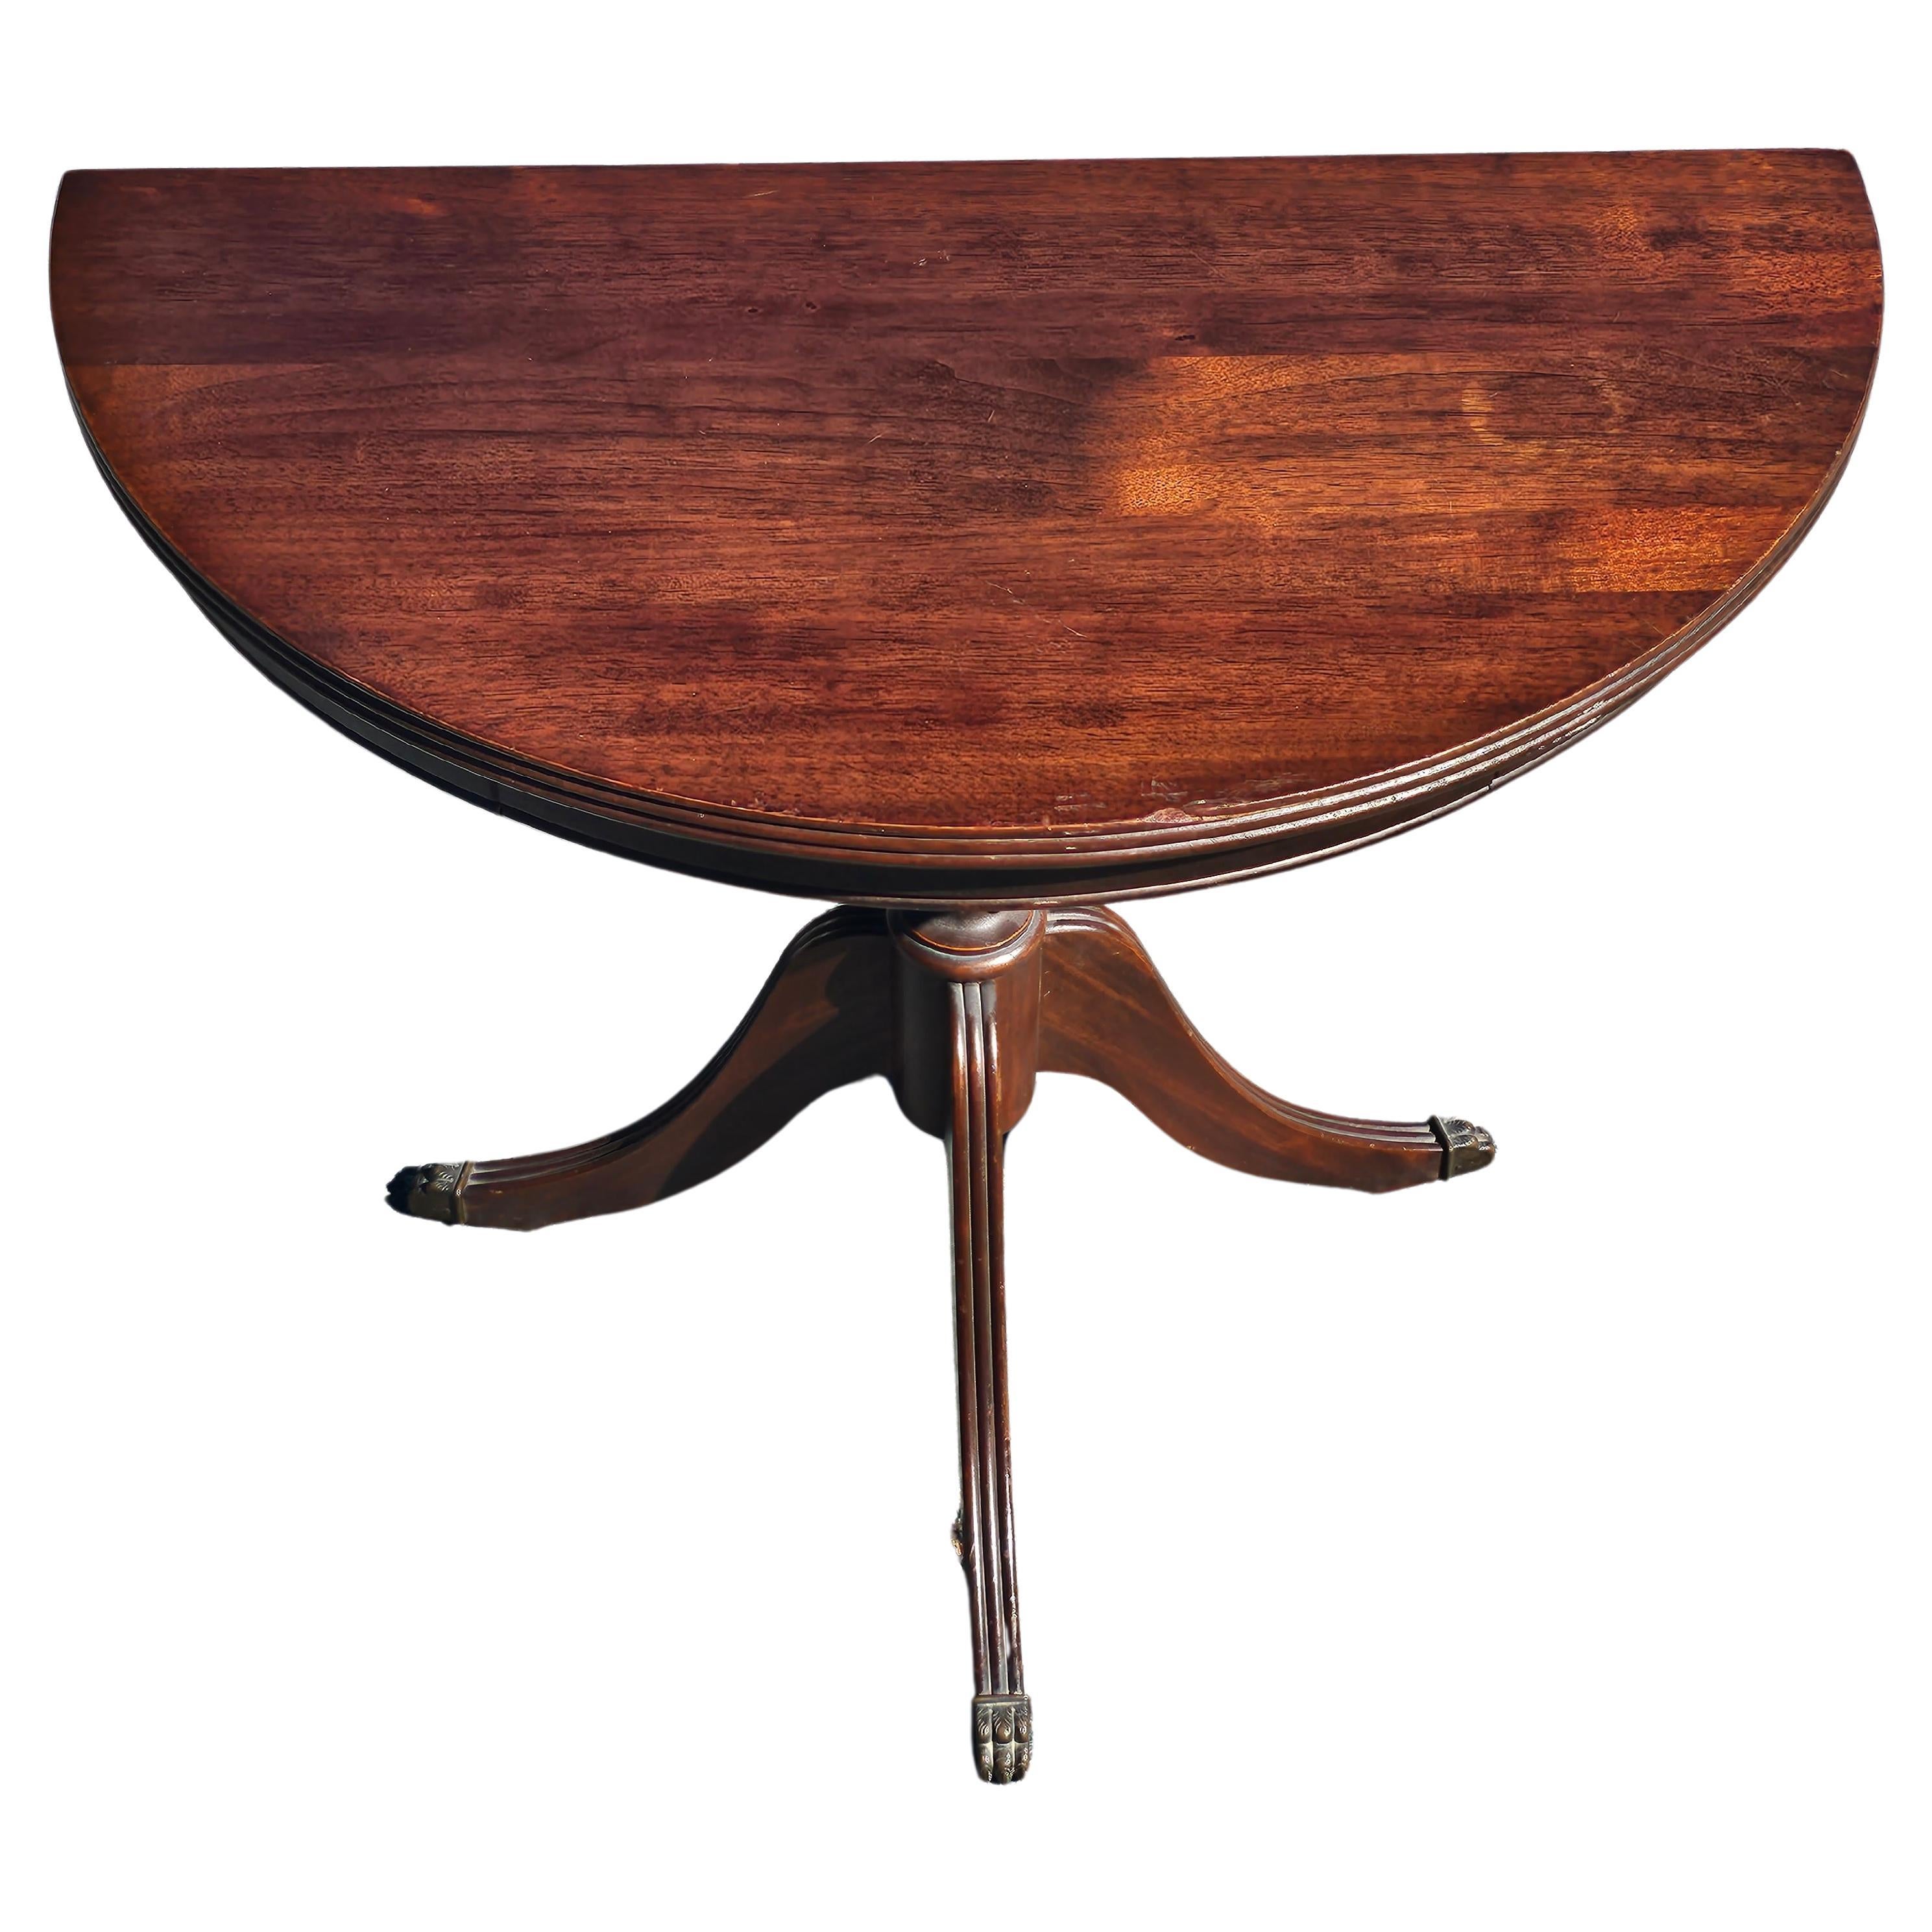 Early 20th Century Federal Mahogany Pedestal Trifid Demilune Table In Good Condition For Sale In Germantown, MD